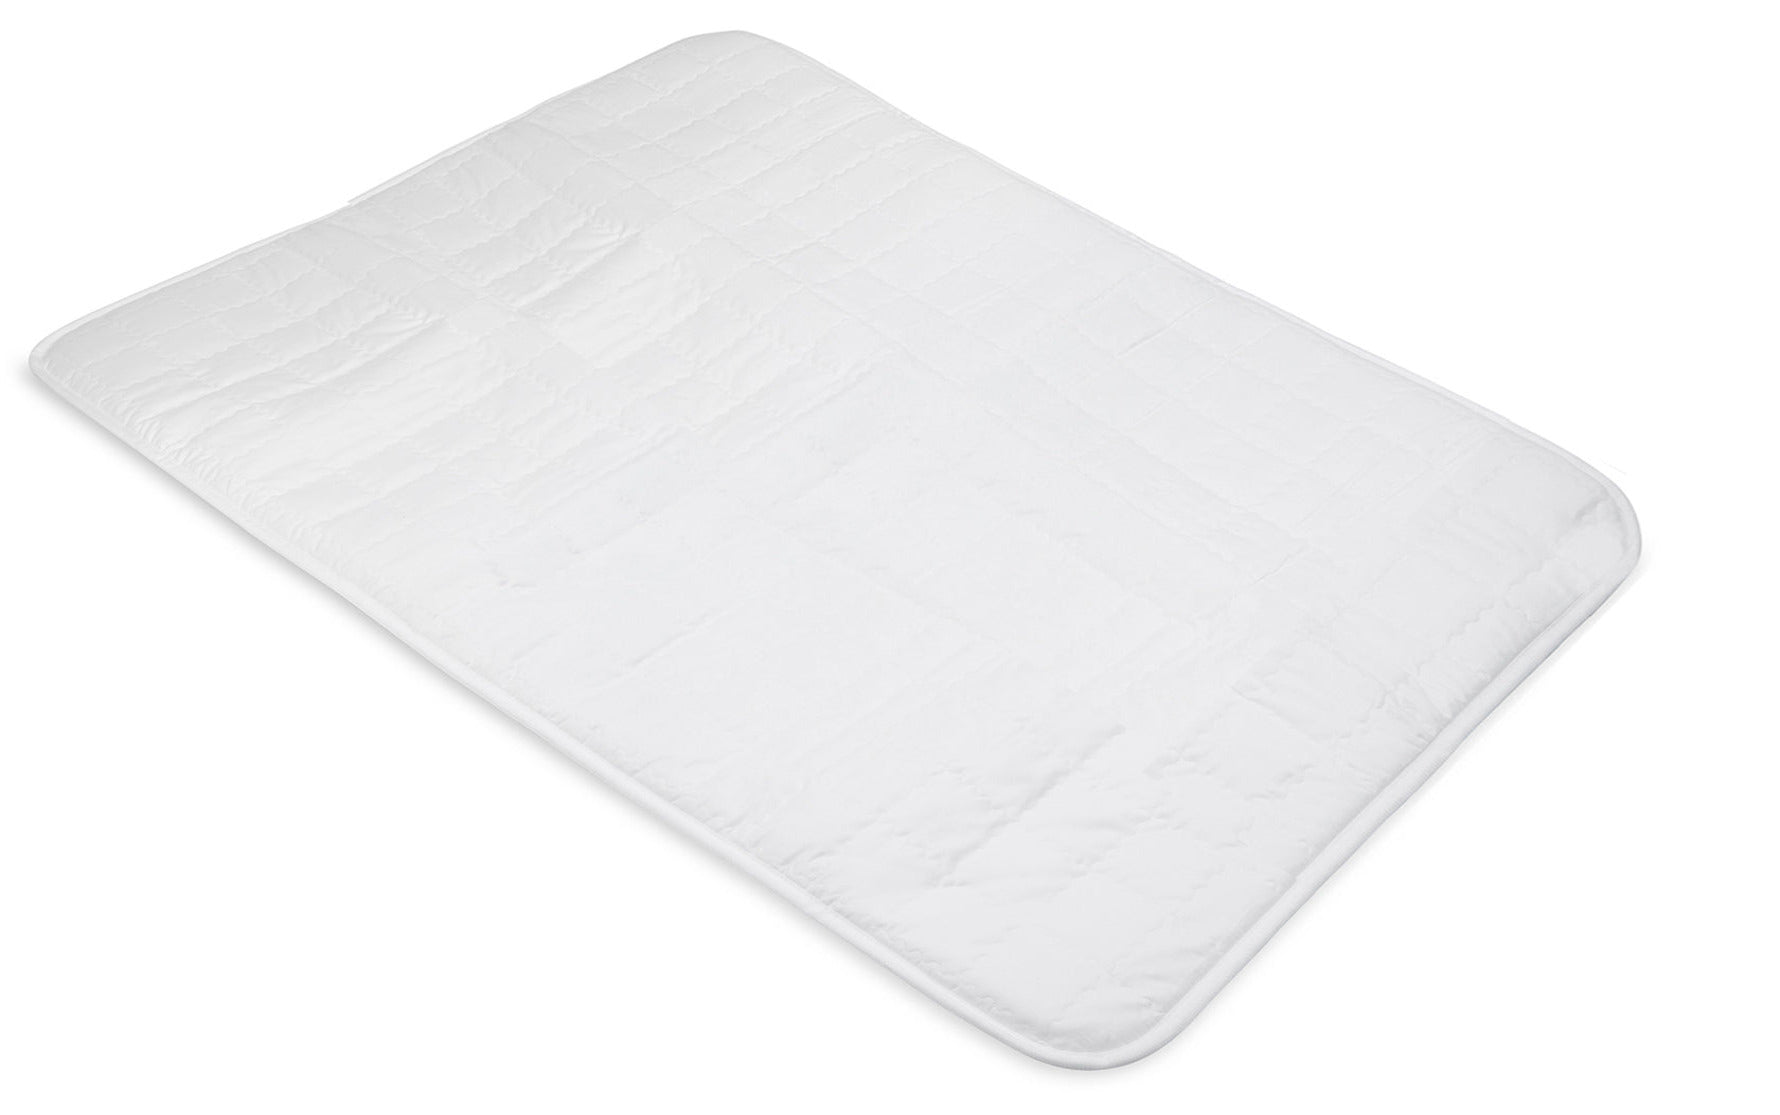 NEW Advanced Sleeptek 2.0 Mat- NO EMF - Double - Order Now for October Delivery